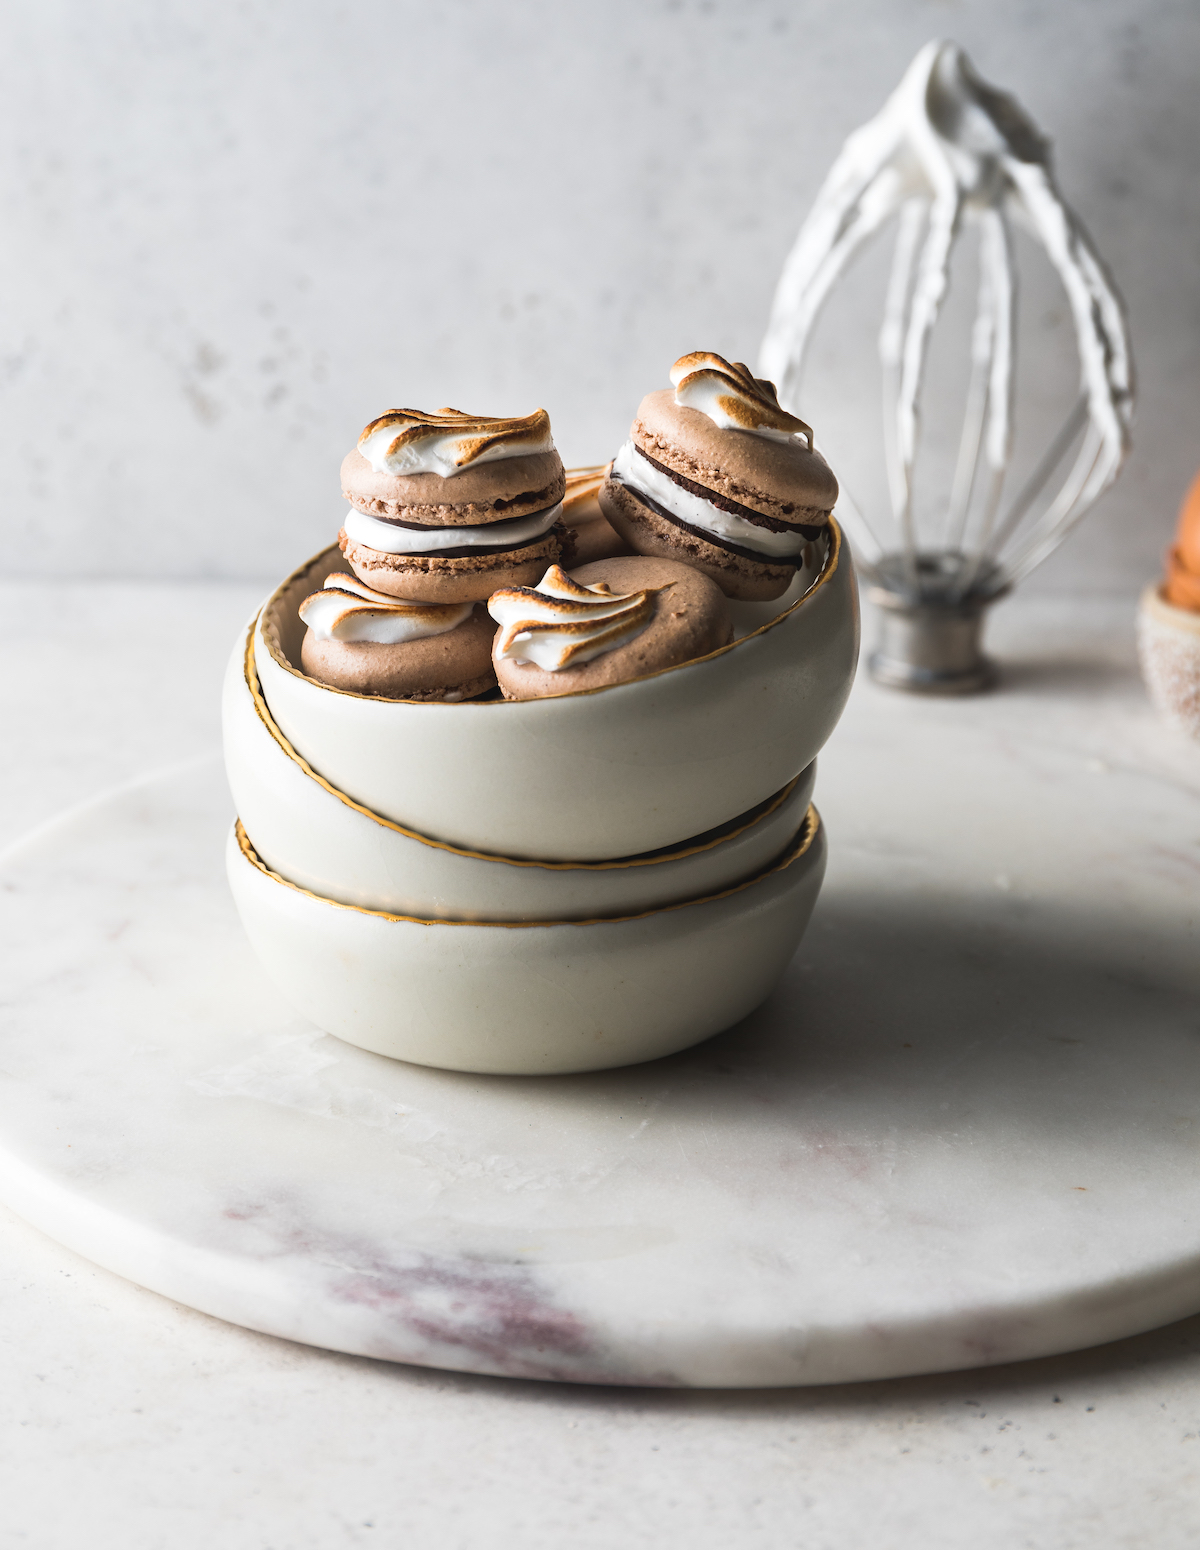 A bowl of chocolate French macarons with marshmallow filling and Mexican hot chocolate glaze